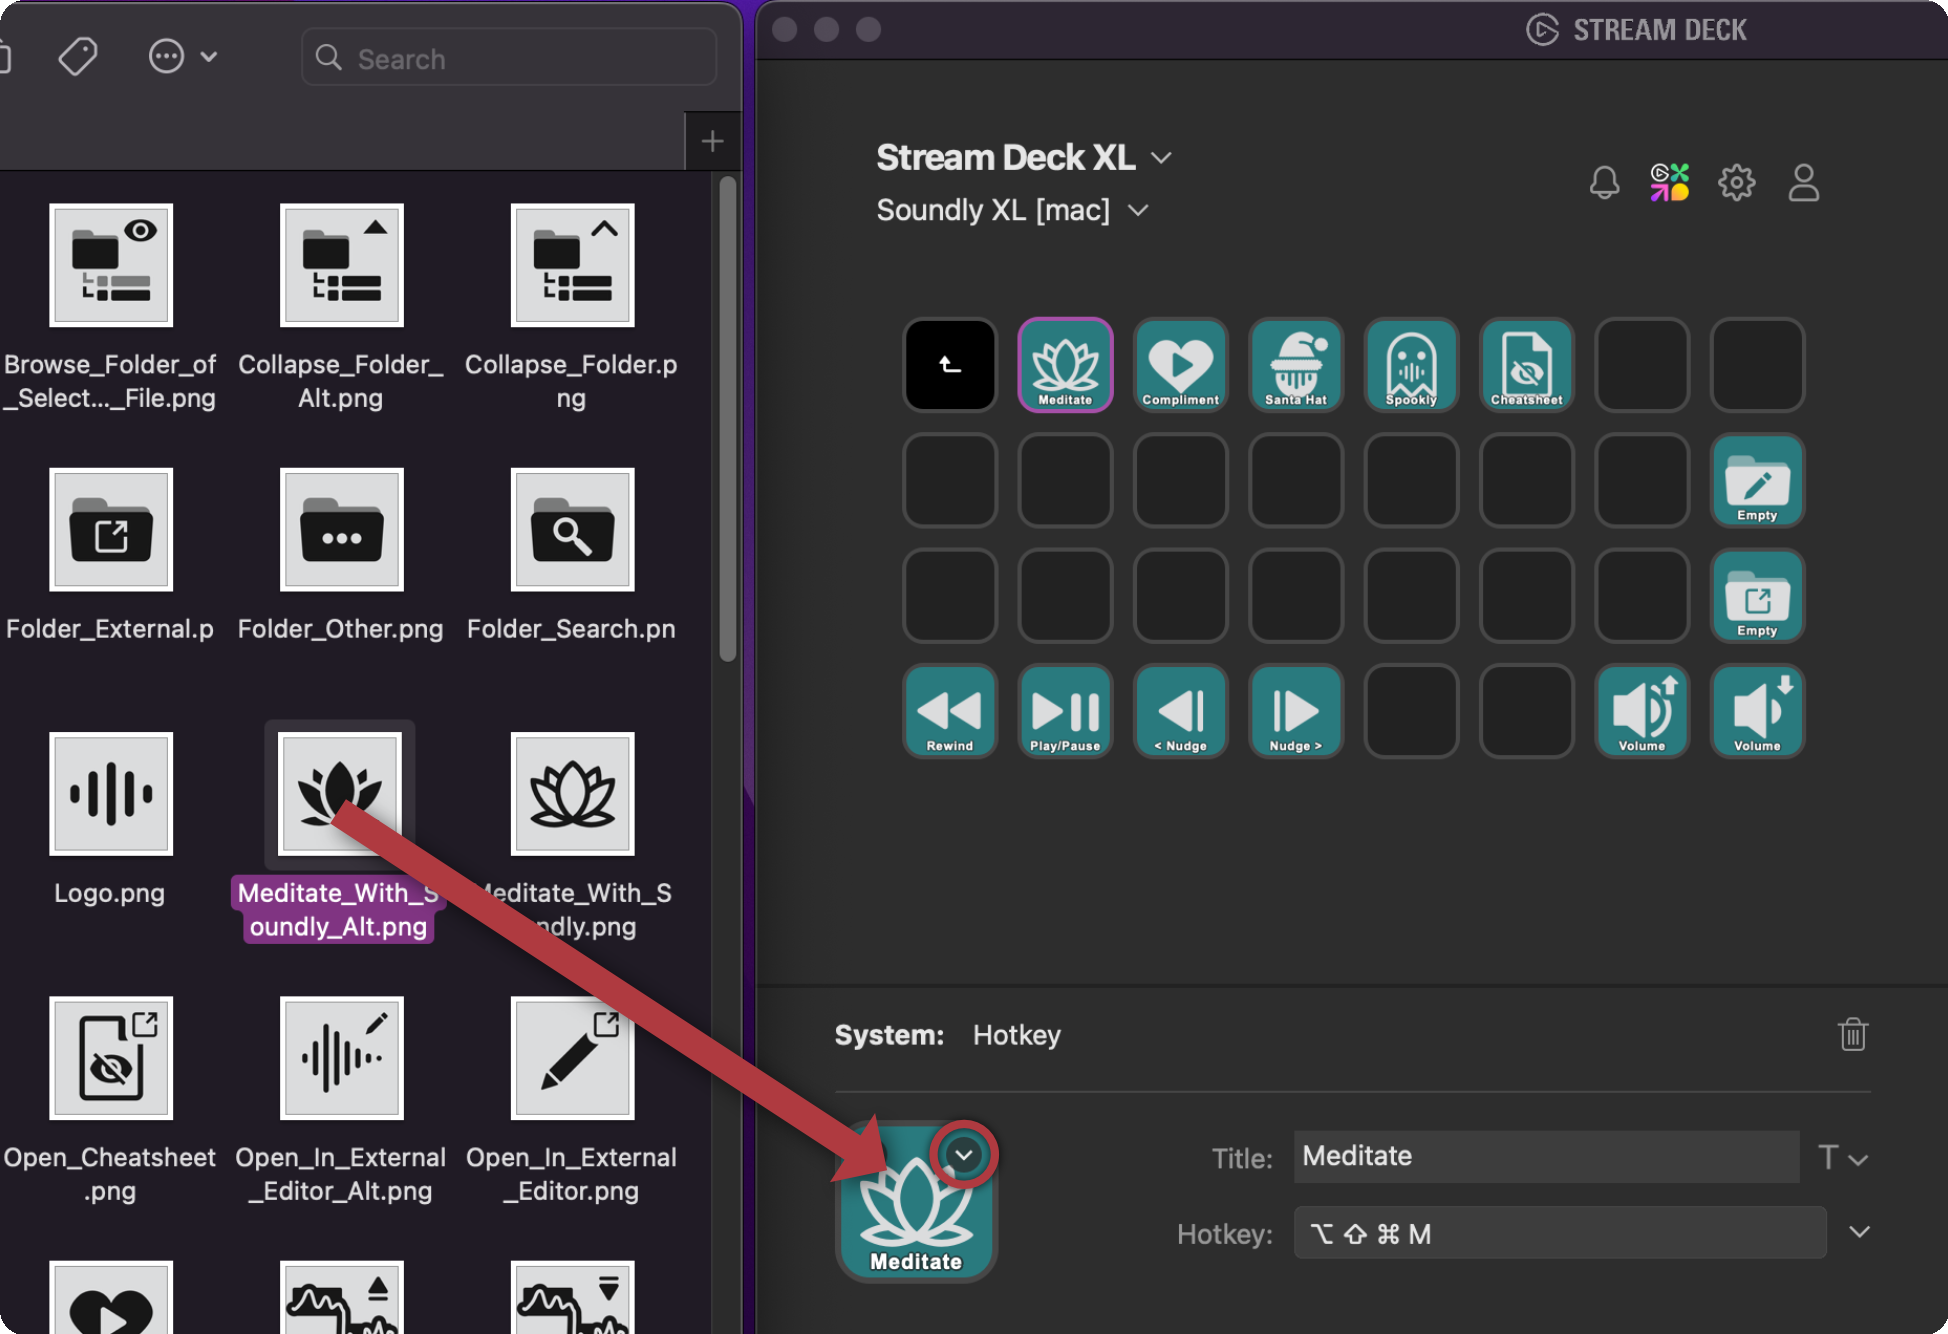 Changing an icon on Stream Deck